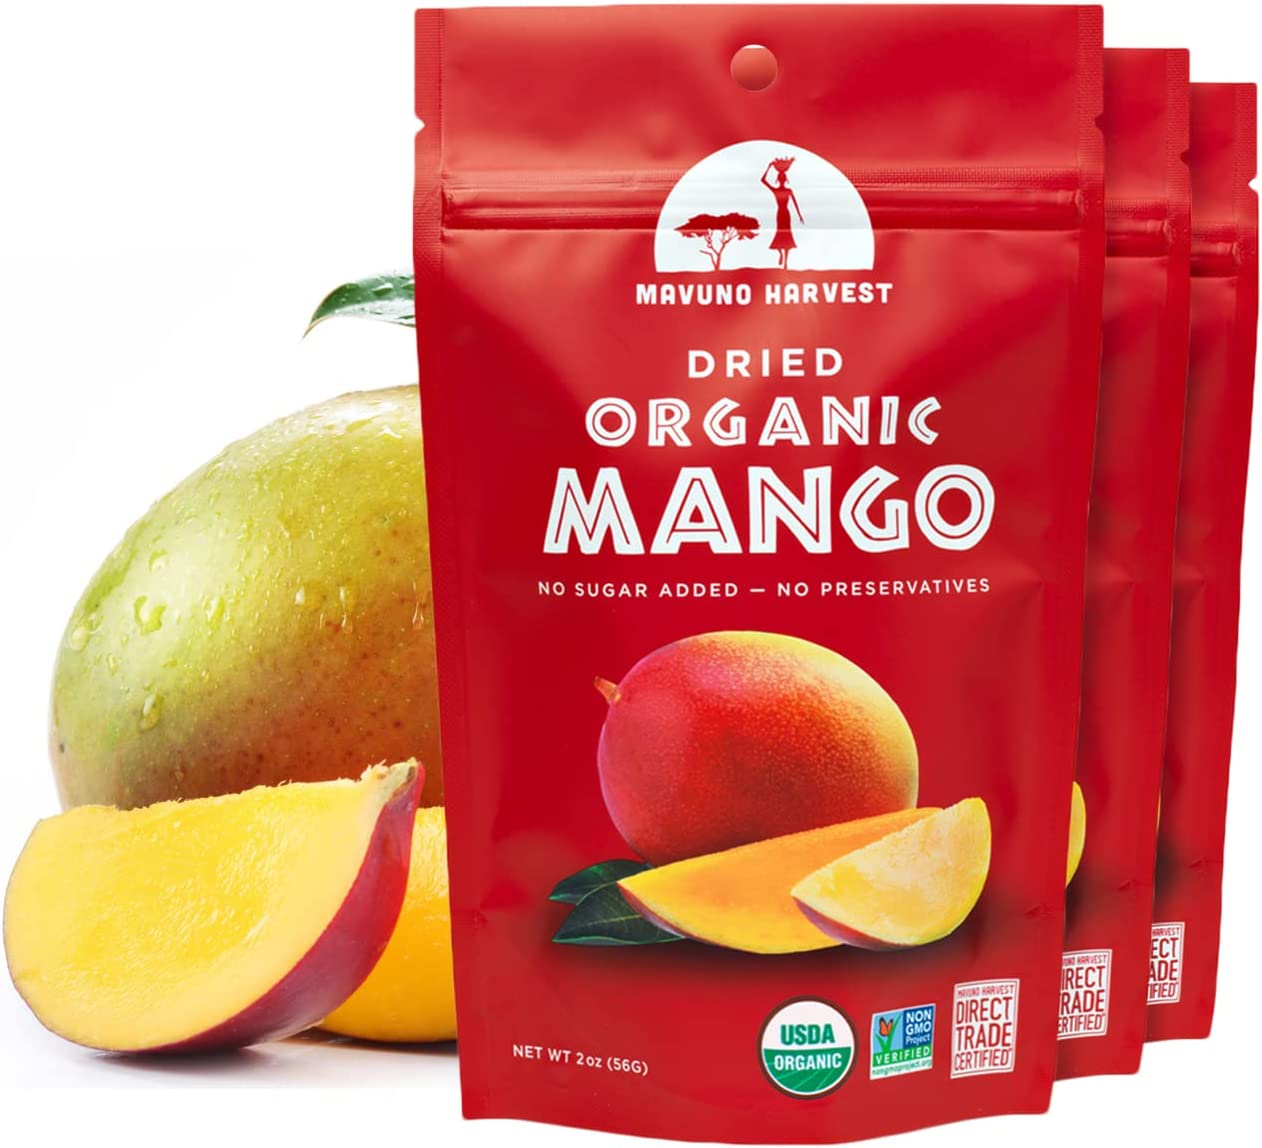 Mavuno Harvest Mango Dried Fruit Snacks | Unsweetened Organic Dried Mango Slices | Gluten Free Healthy Snacks for Kids and Adults | Vegan, Non GMO, Direct Trade | 2 Ounce, Pack of 3